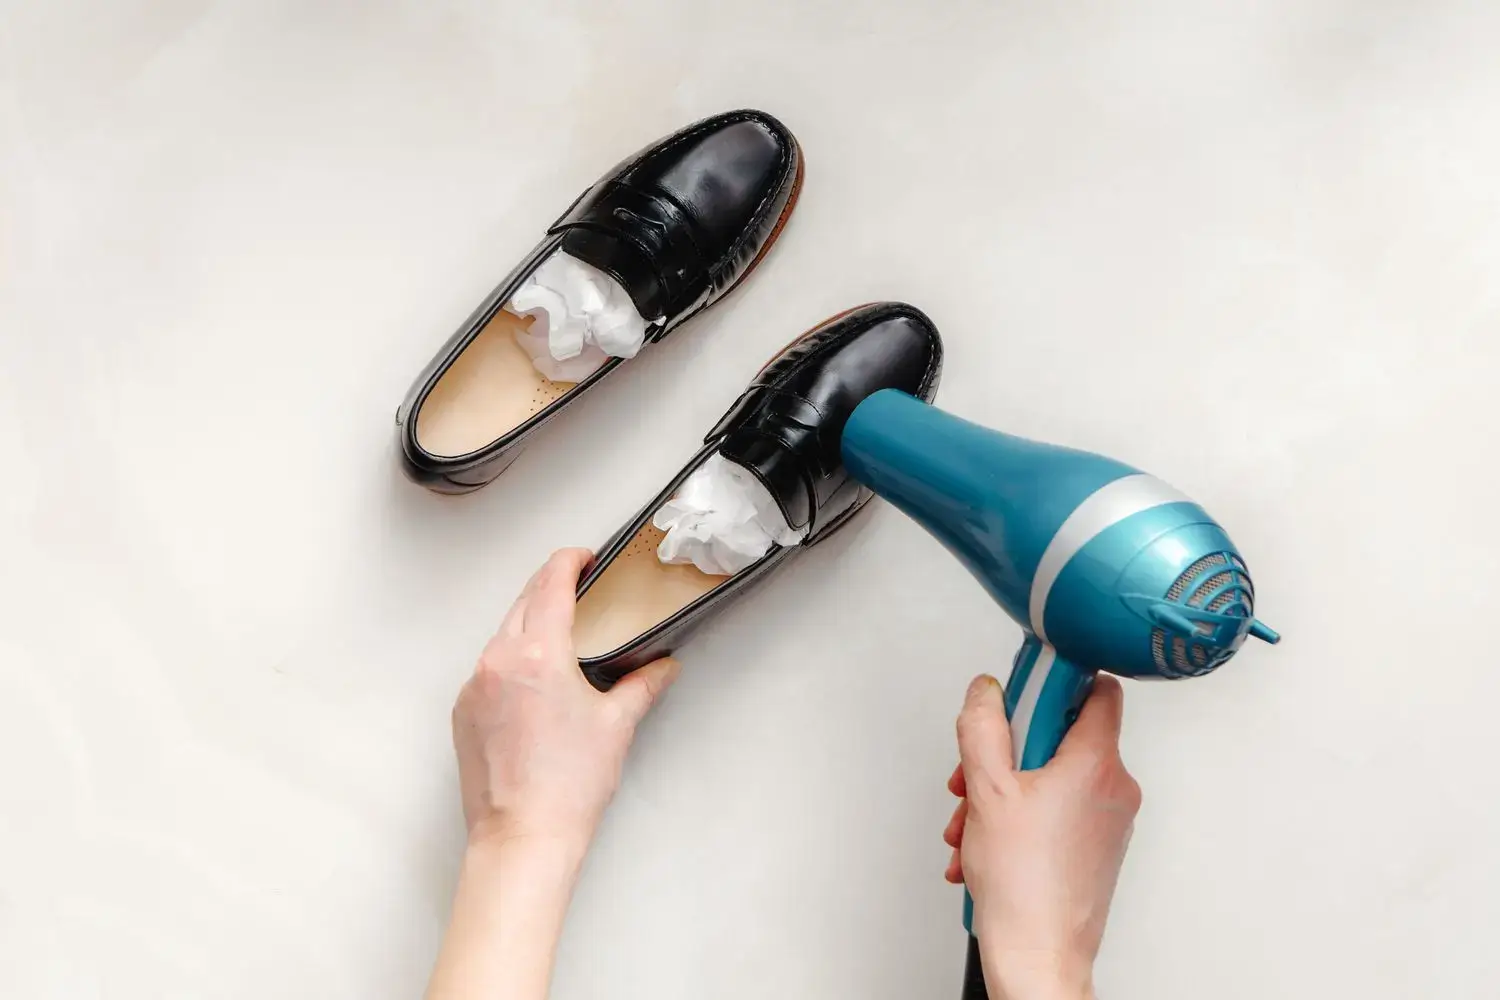 Stretching out shoes with a hairdryer and paper stuffing.